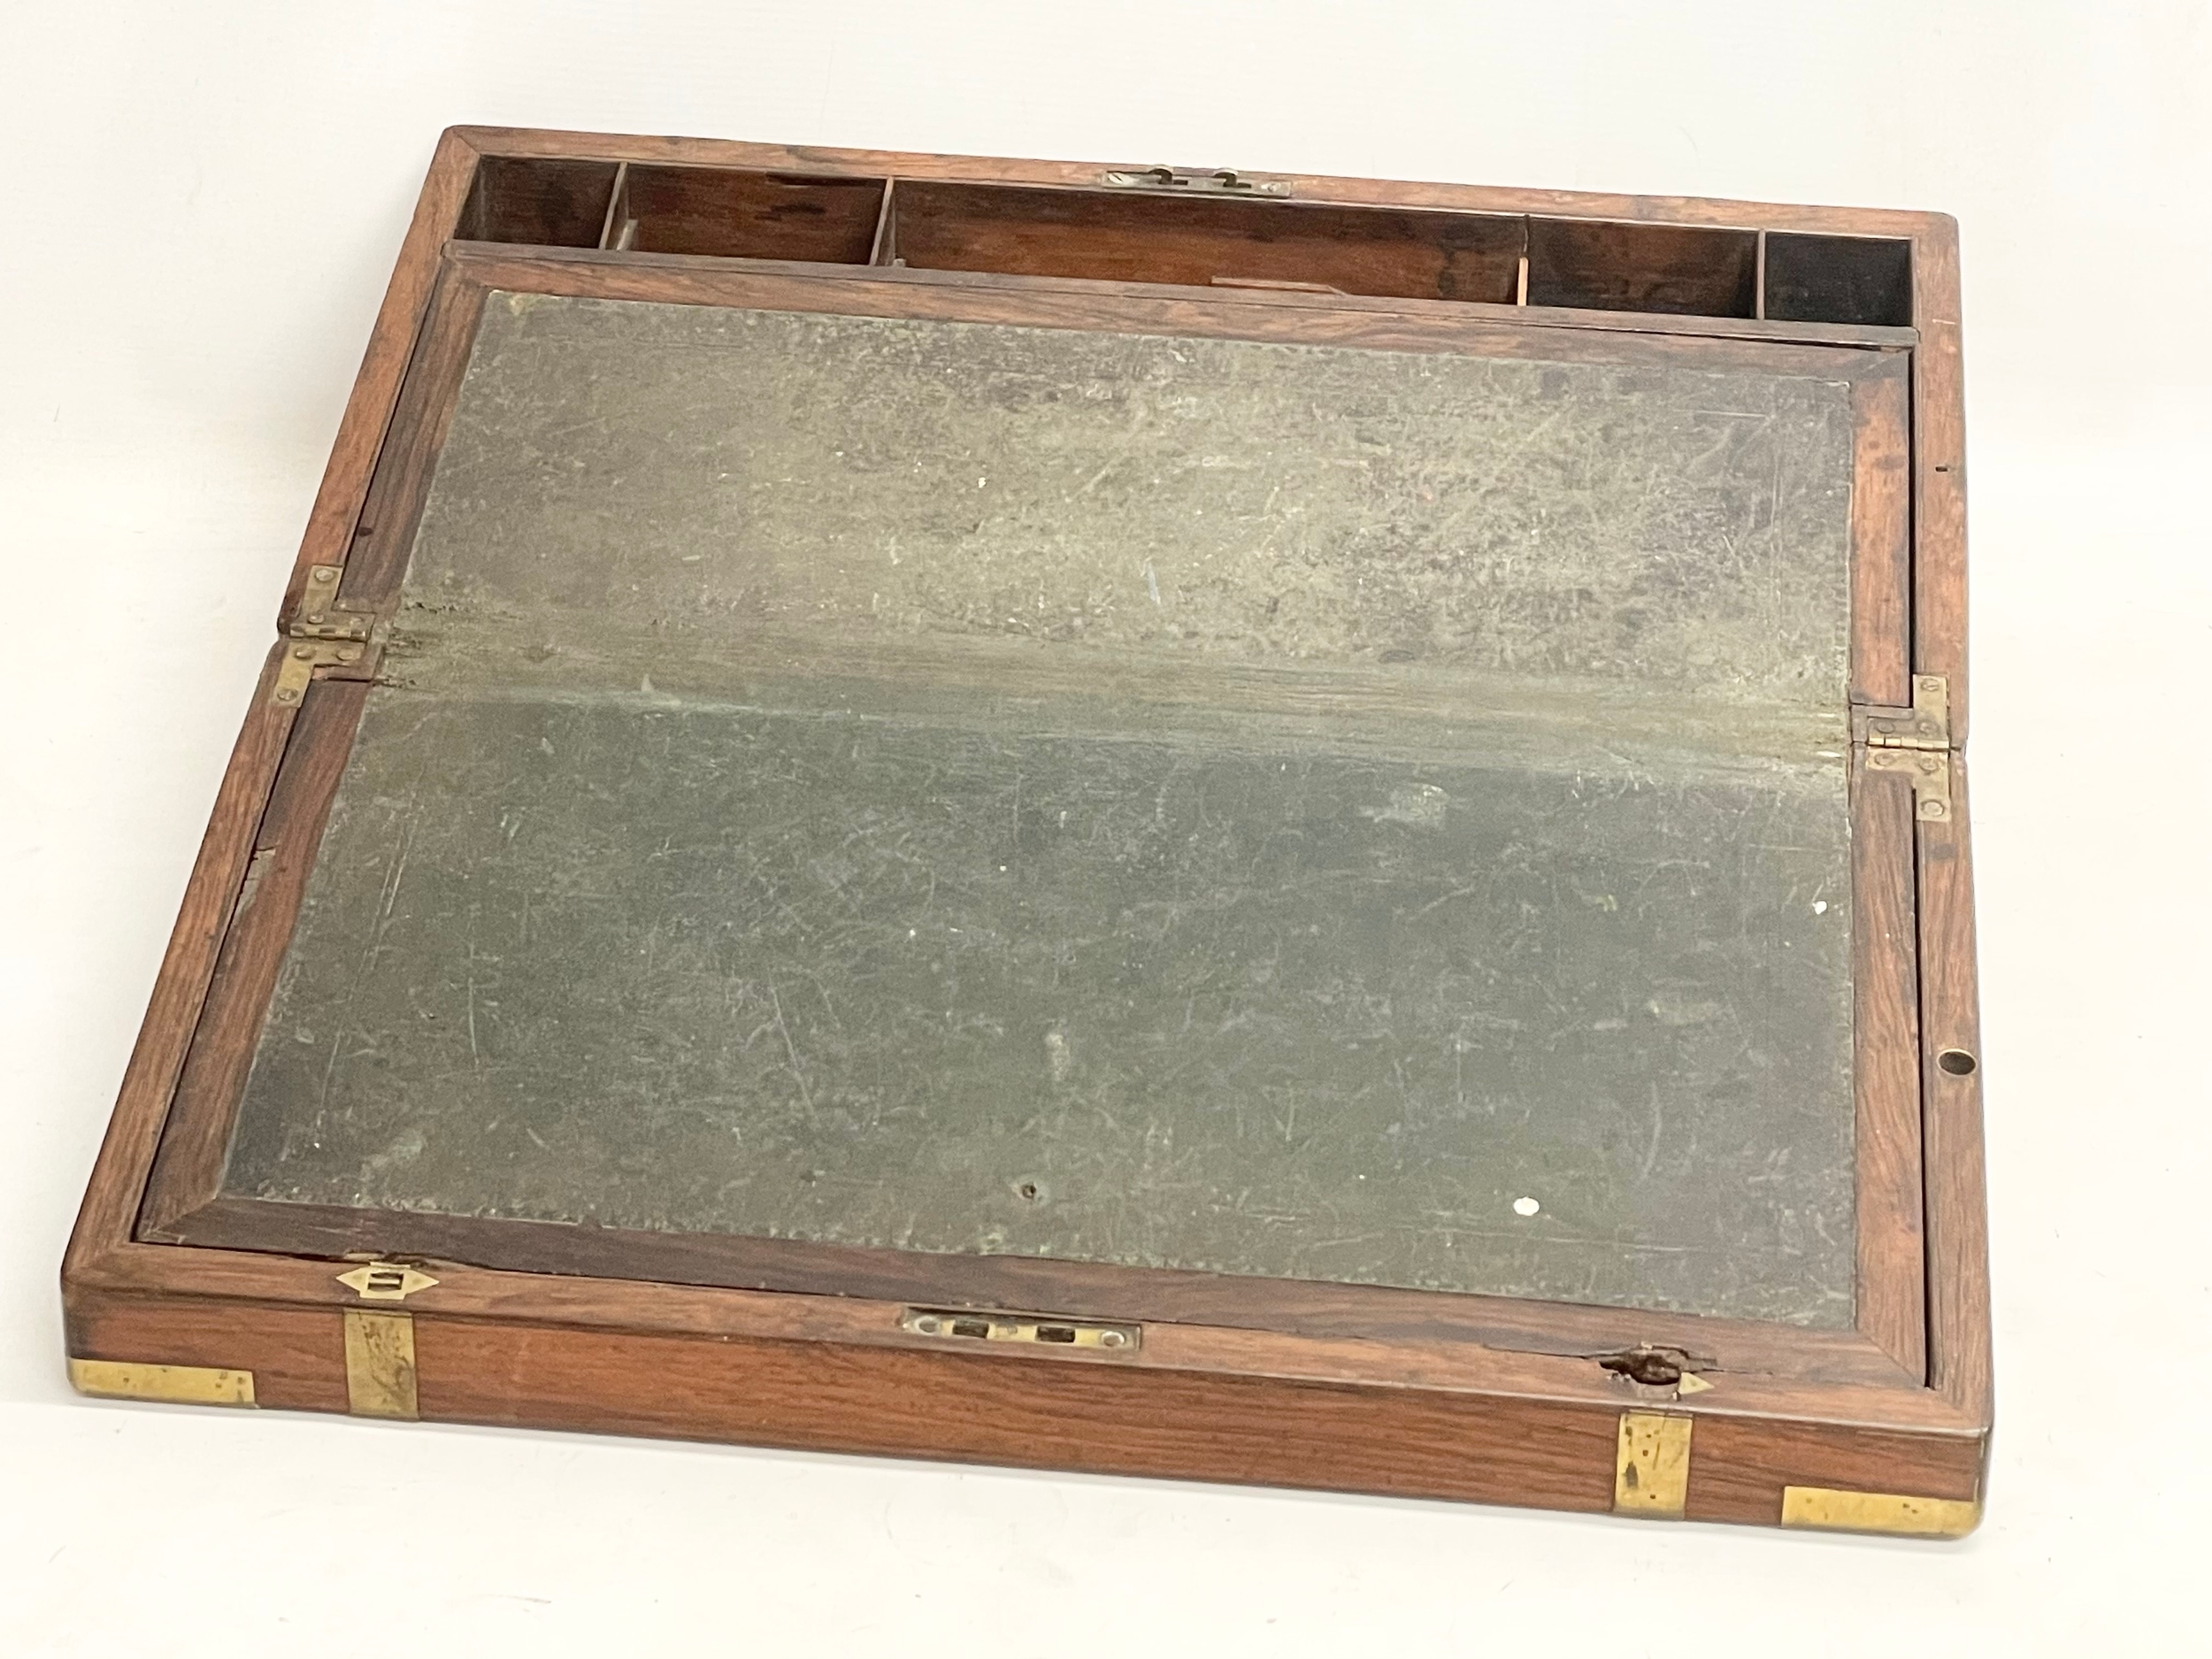 A large Victorian rosewood brass bound writing slope. Closed 51x27x18cm. - Image 4 of 7